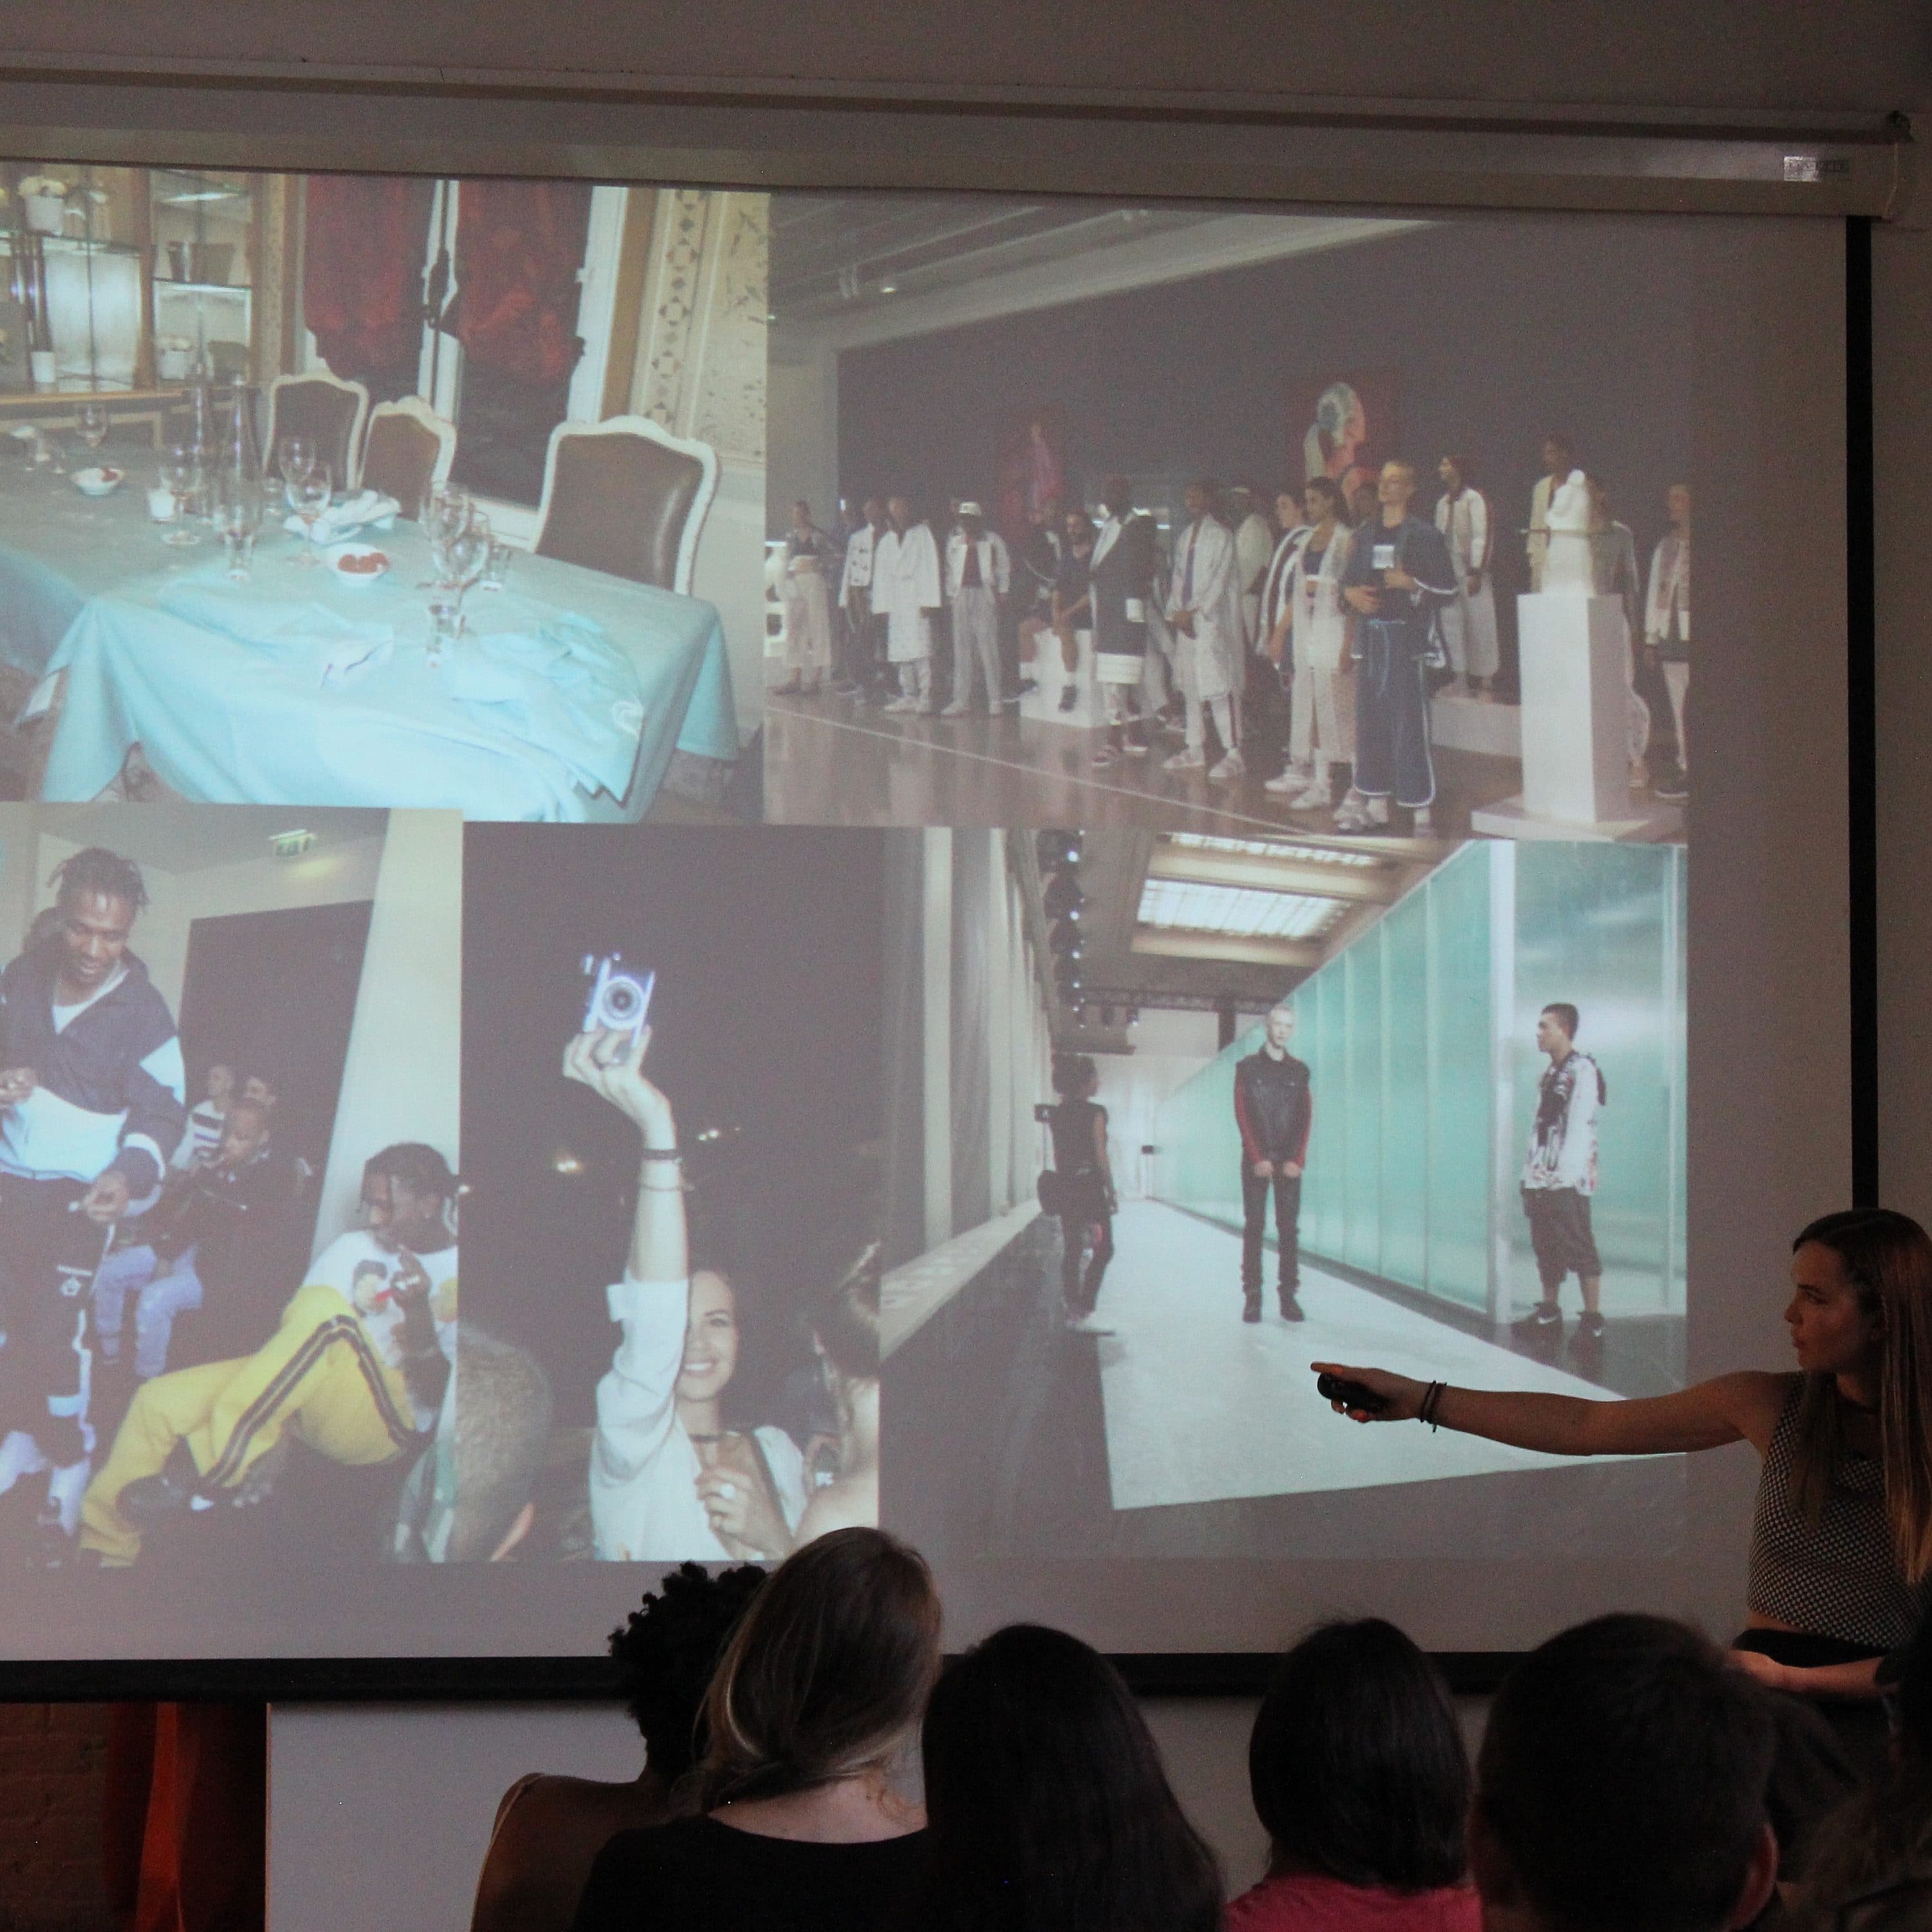 A woman stands and points at a presentation screen displaying various fashion images. The audience sits facing the screen, showing interest. The images include models on runways, people holding items, group pictures, and artistic settings.